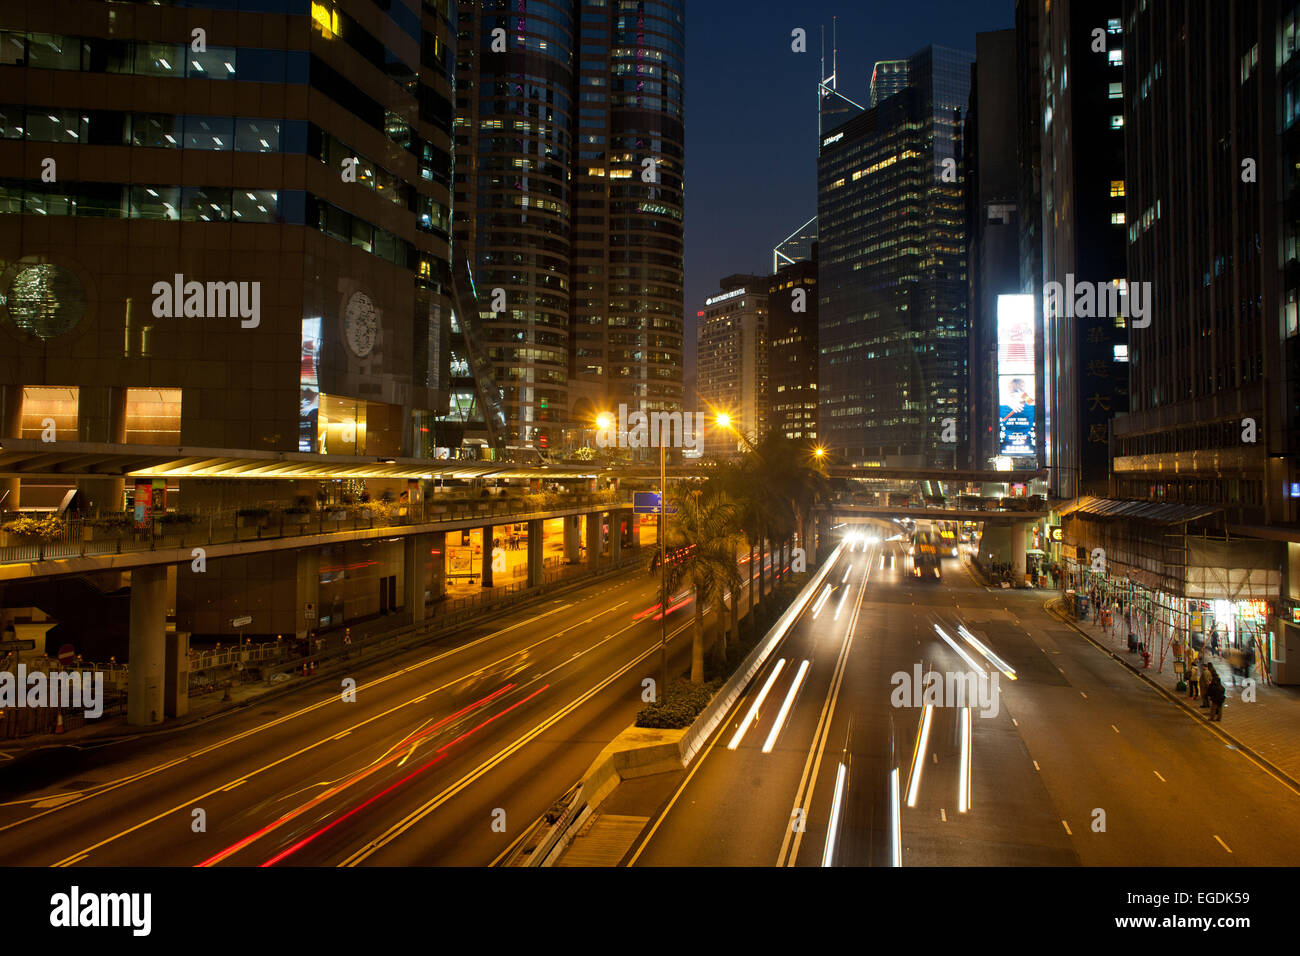 Connaught Street in Central Hong Kong with night time traffic shot at long exposure. 7 million people live on 1,104km square, ma Stock Photo